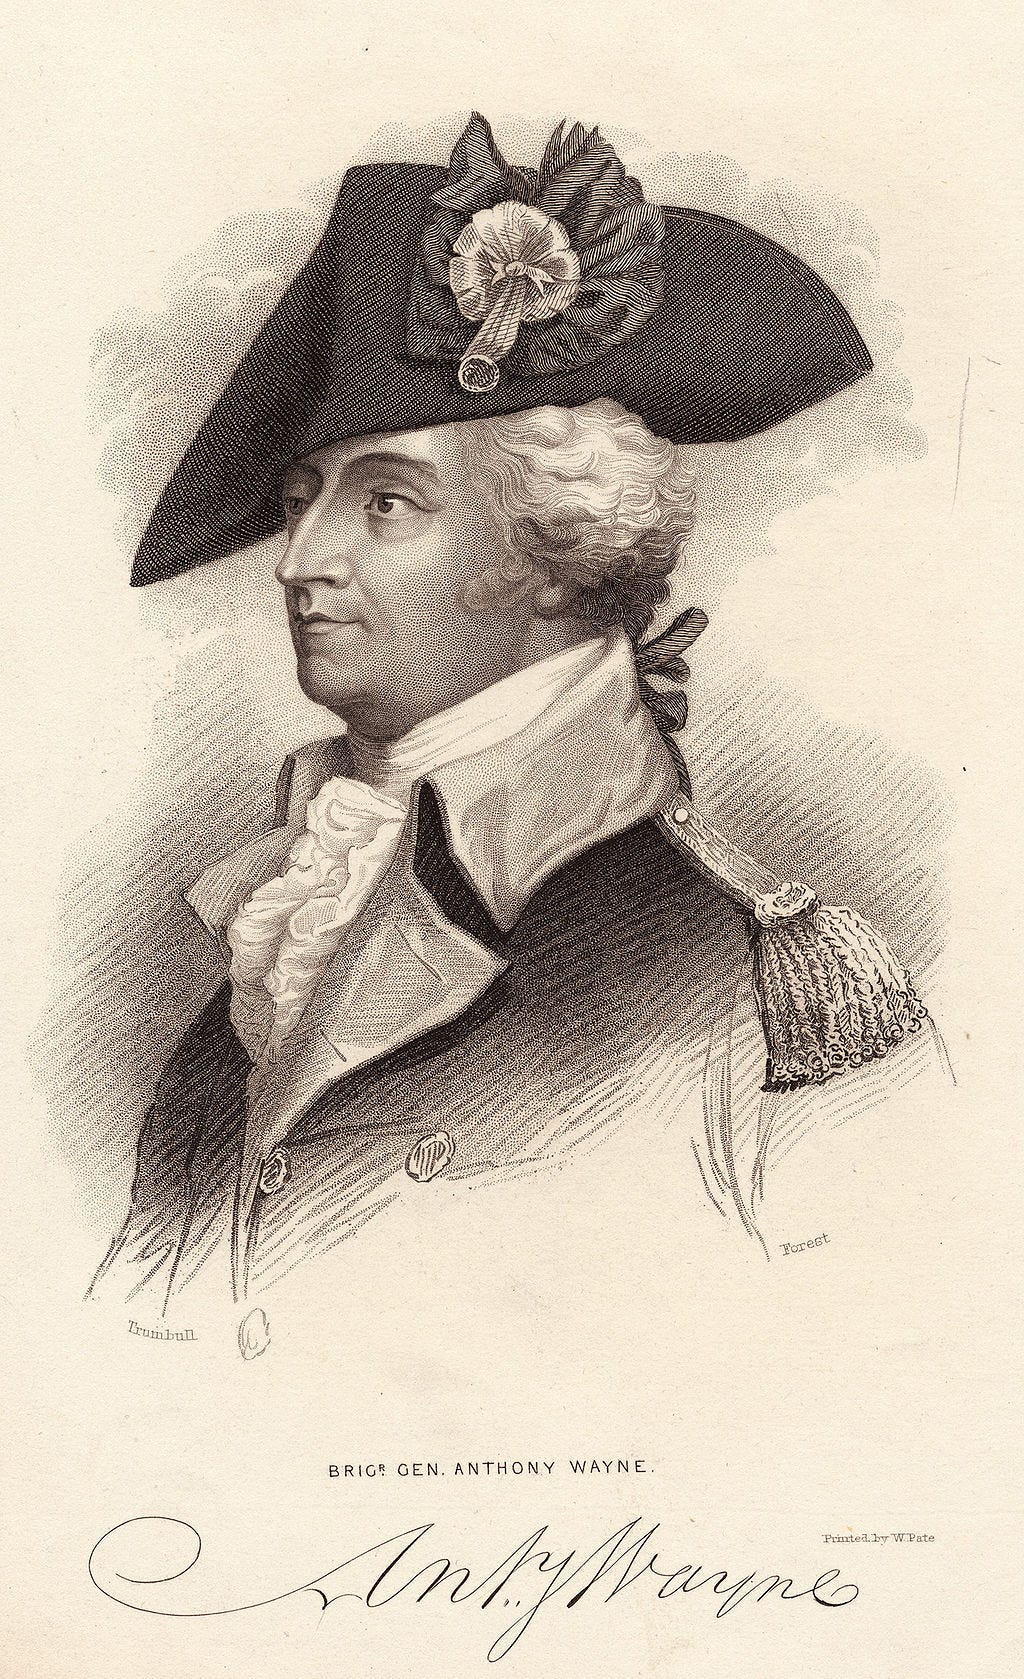 Sketch of Brigadier General Anthony Wayne.  His signature appears across the bottom.